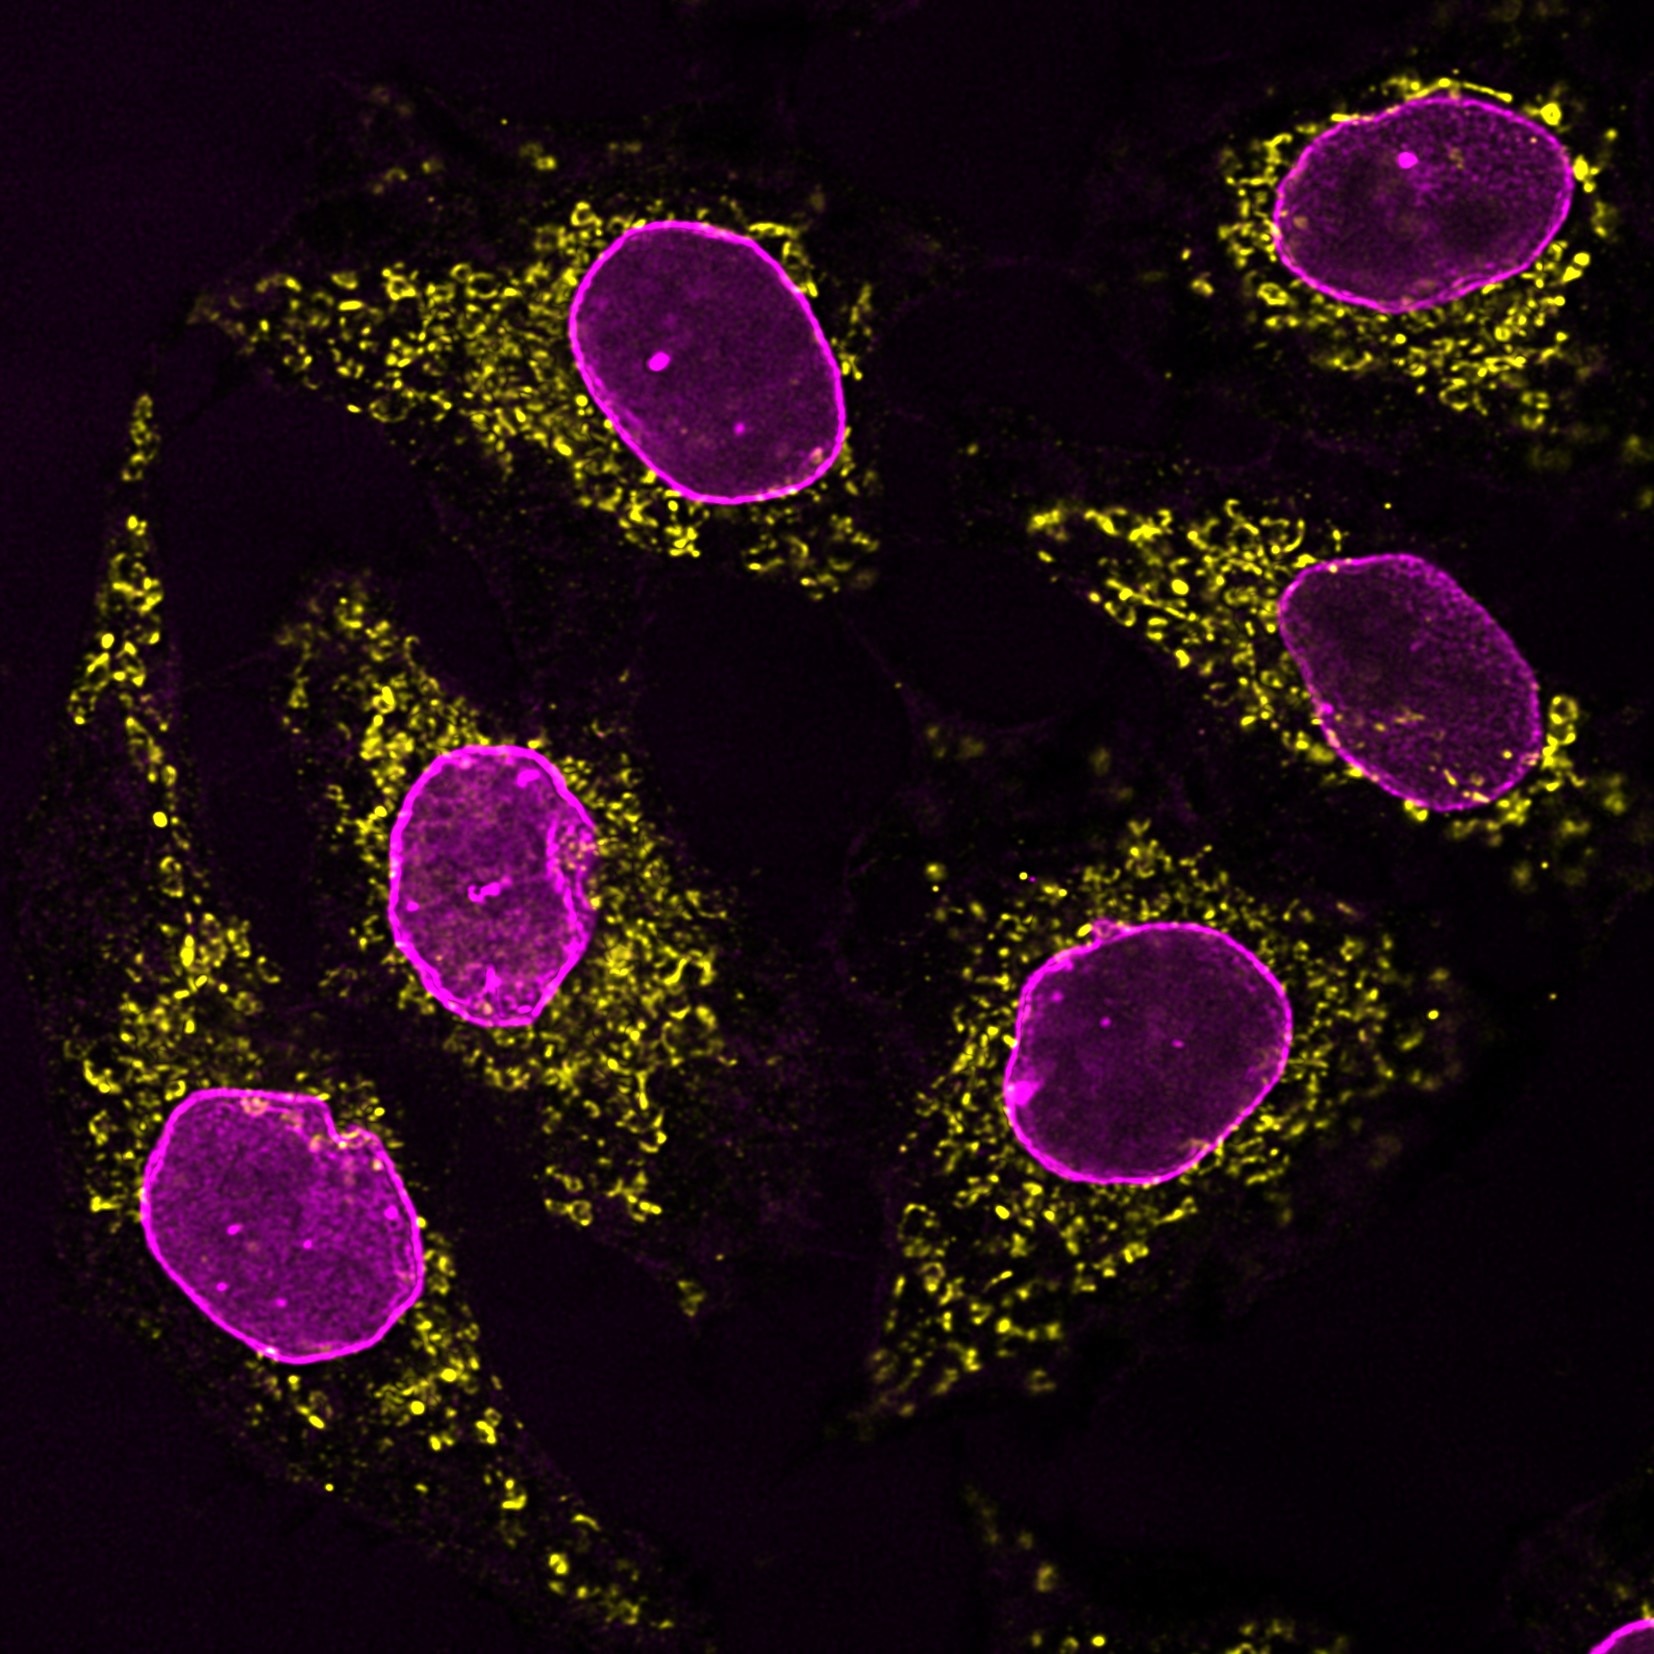 Immunofluorescence analysis of HeLa cells co-stained with mouse IgG1 anti-HSP60 antibody (66041-1-Ig) and mouse IgG2b anti-Lamin A/C antibody followed by Nano-Secondary® alpaca anti-mouse IgG1, recombinant VHH, CoraLite® Plus 555 (smsG1CL555-1, yellow) and Nano-Secondary® alpaca anti-mouse IgG2b, recombinant VHH, CoraLite® Plus 647 (smsG2bCL647-1, magenta). Images were recorded at the Core Facility Bioimaging at the Biomedical Center, LMU Munich.